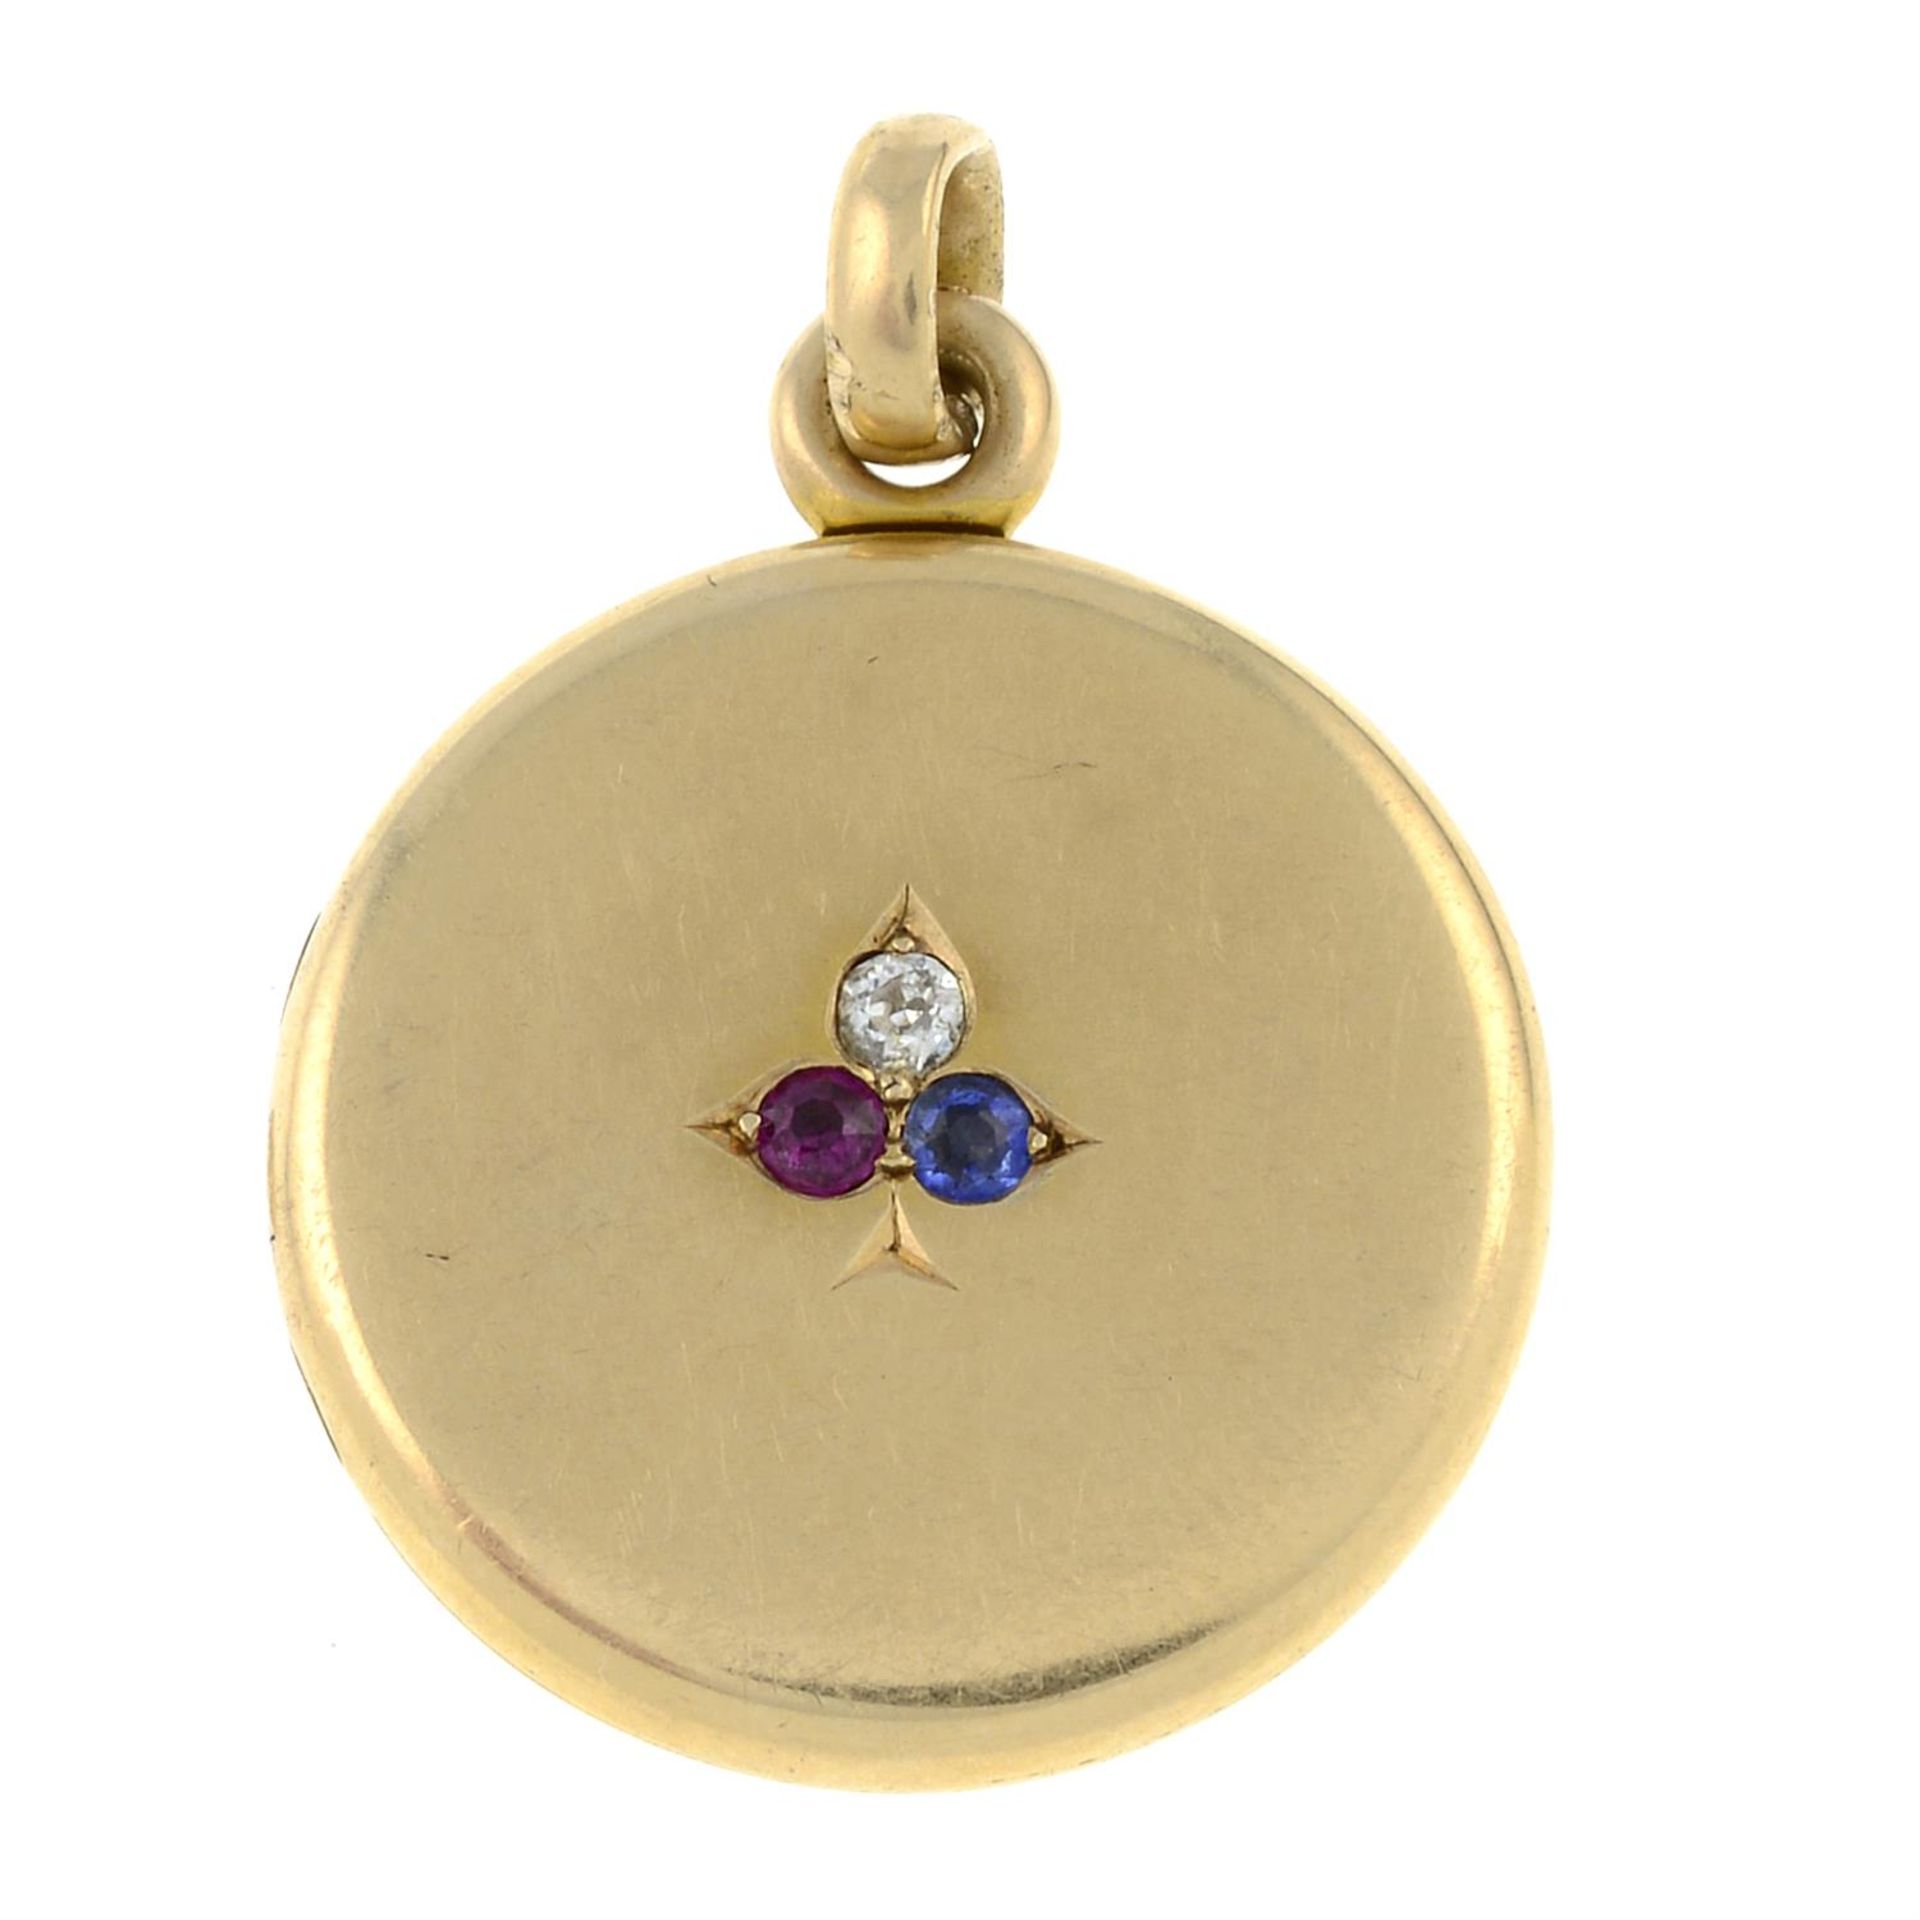 An early 20th century gold diamond, ruby and sapphire locket, depicting a shamrock.